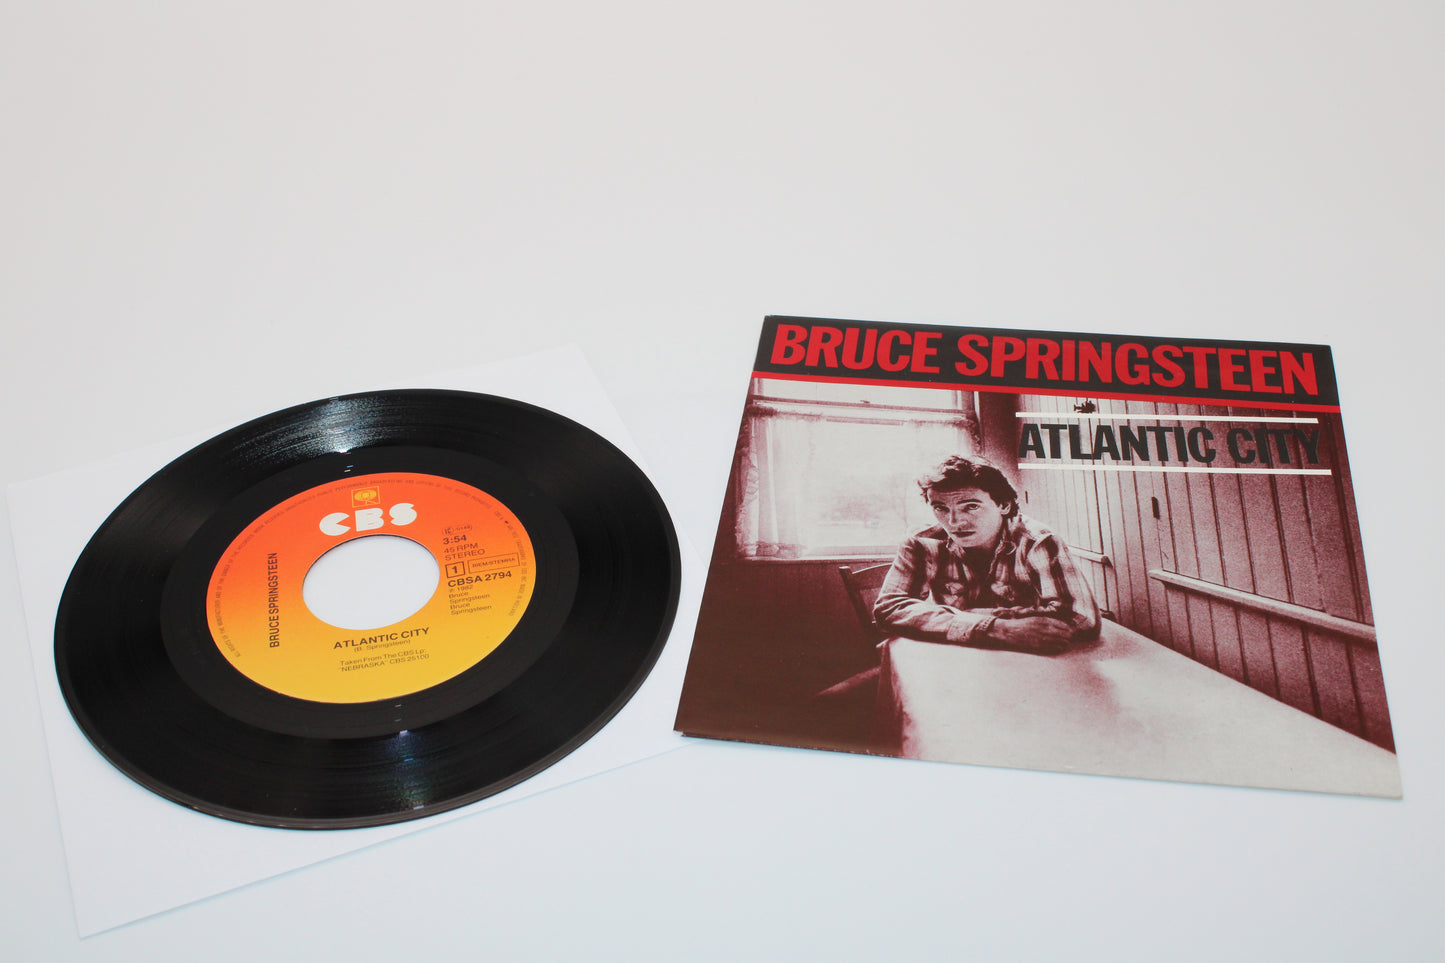 Bruce Springsteen "Atlantic City" 45 record – Single w/Picture Sleeve Vinyl Import Collectible